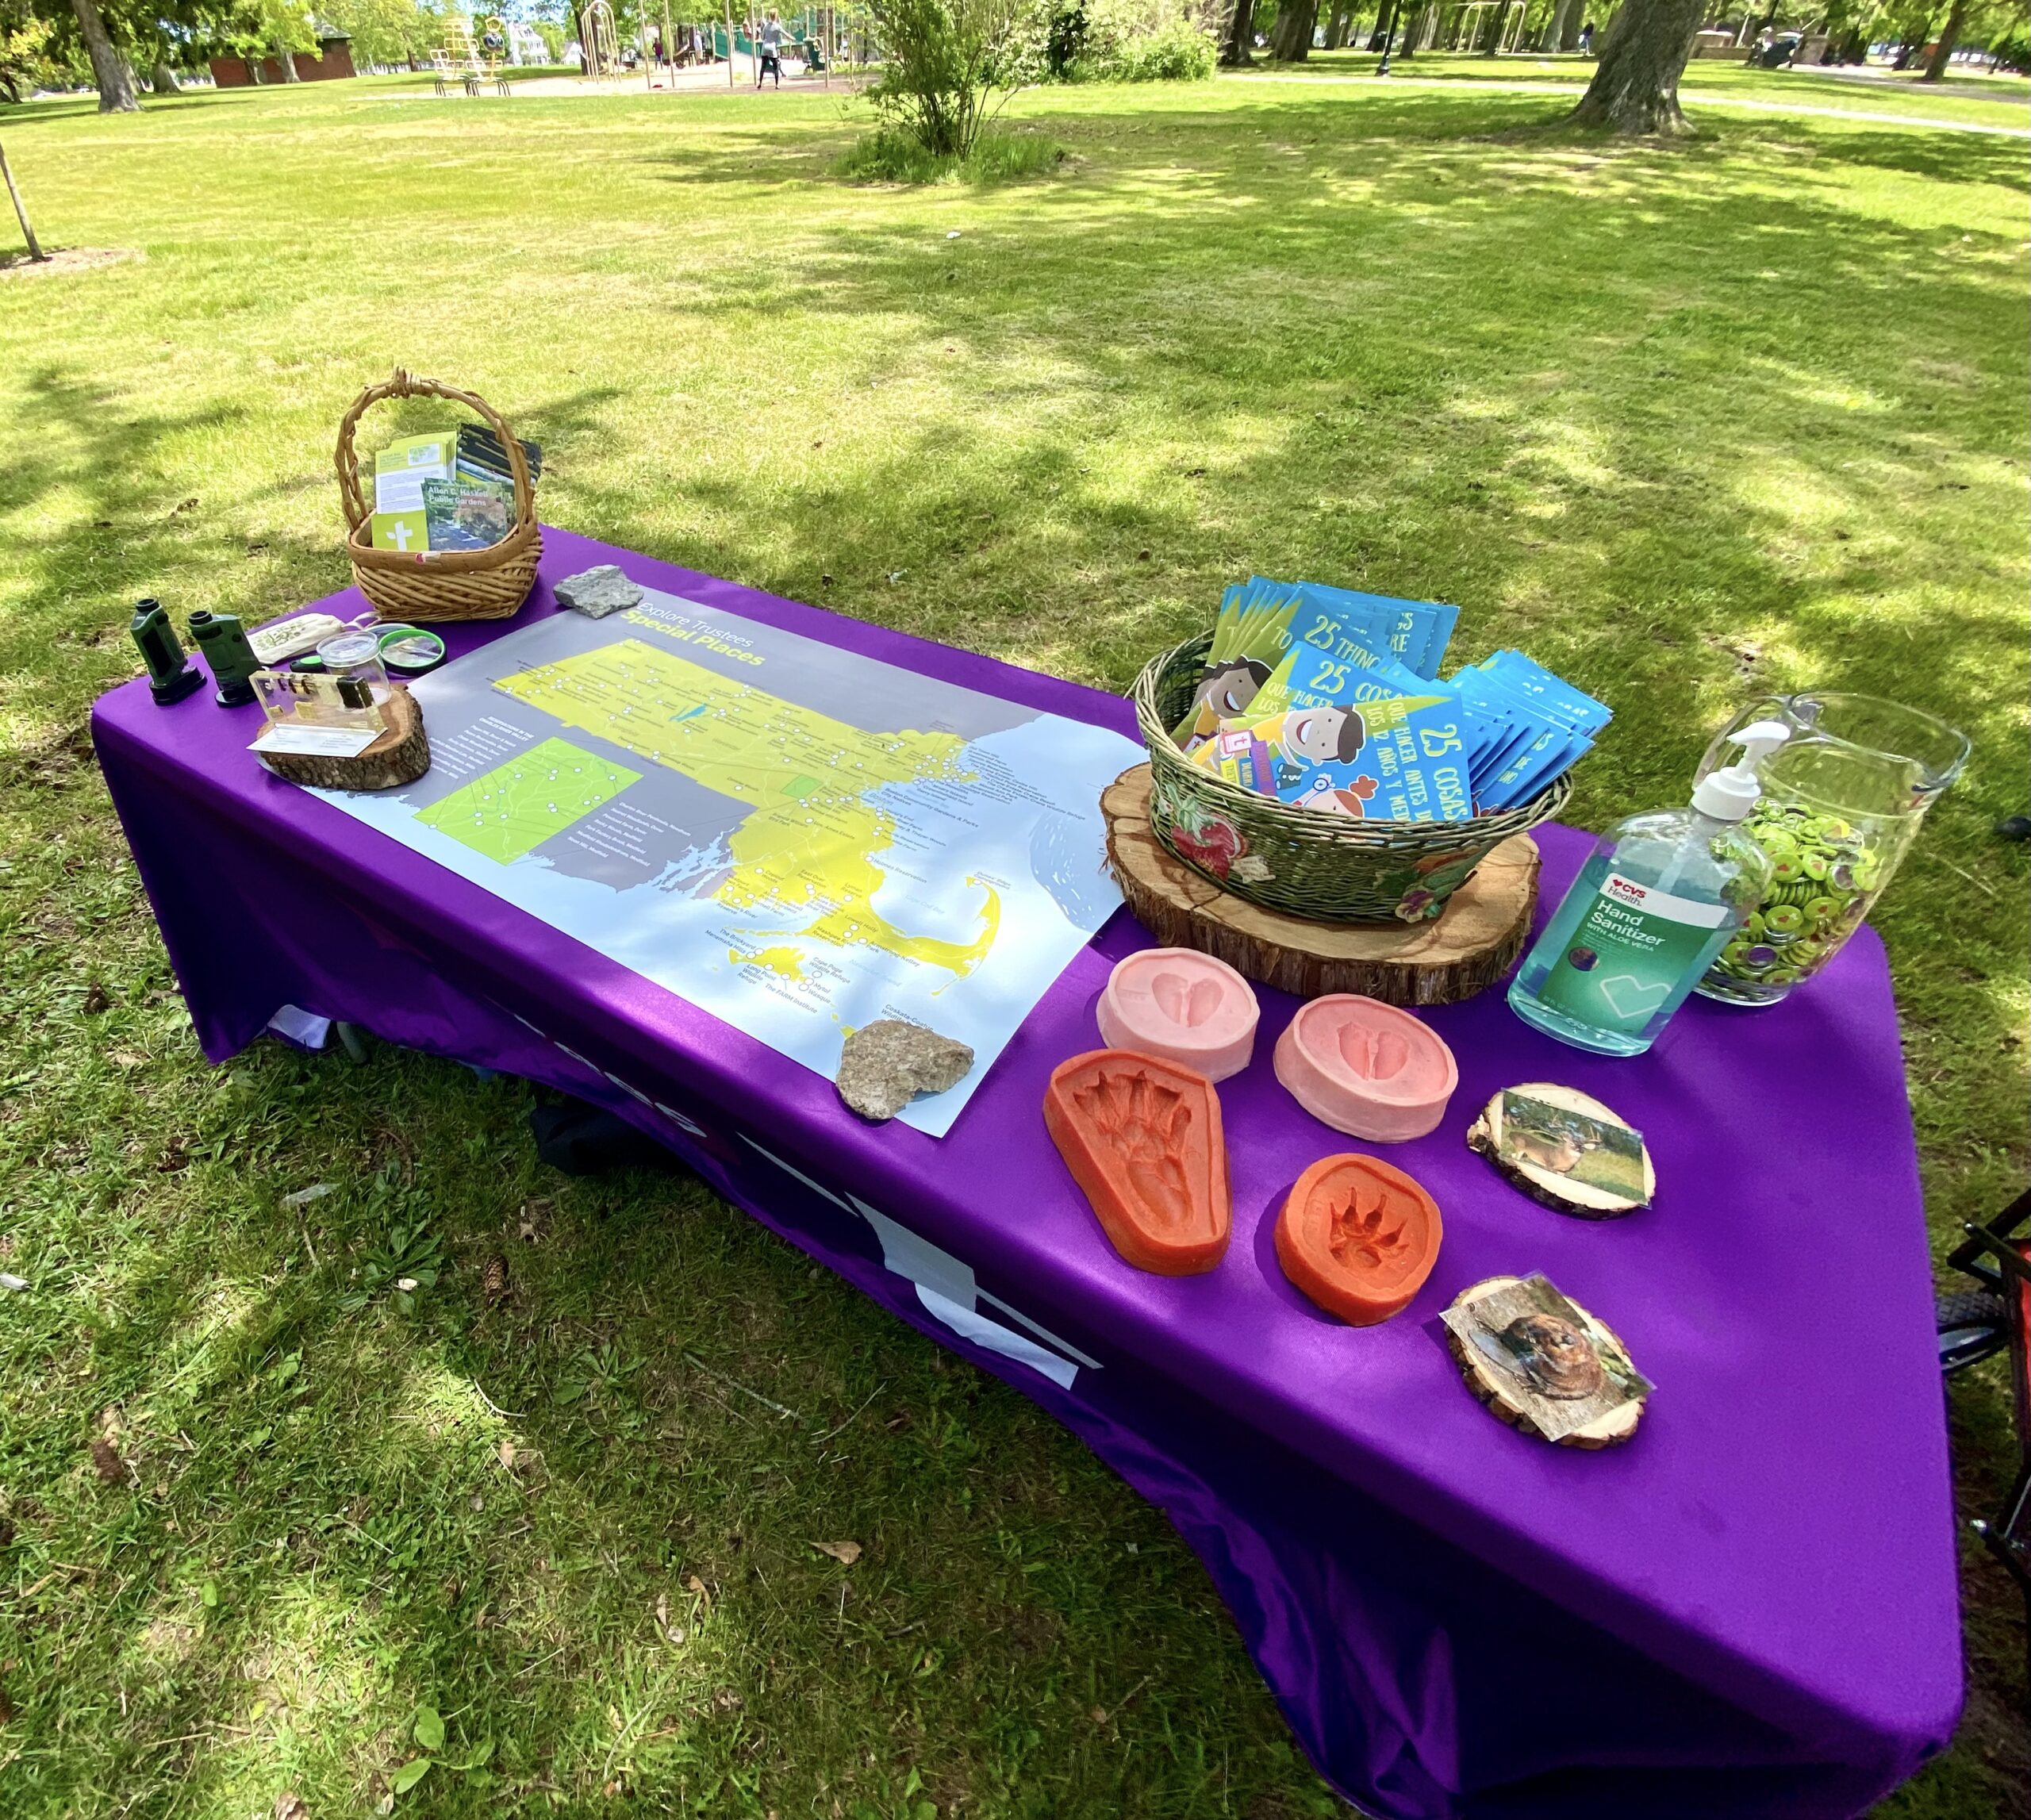 a table with a purple tablecloth and props for playing and exploring